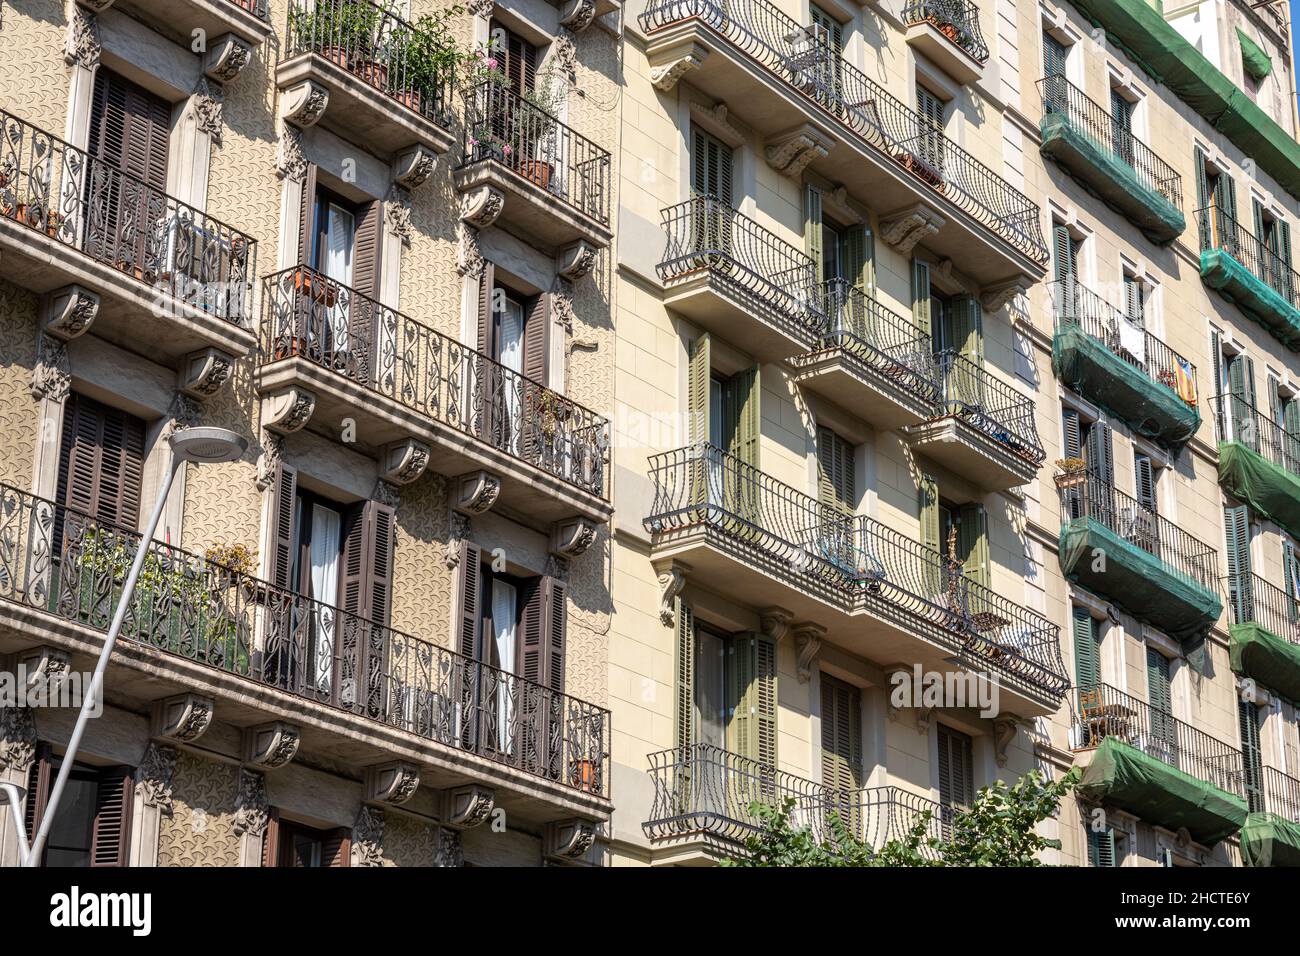 Typical facade of an apartment building seen in Barcelona, Spain Stock Photo